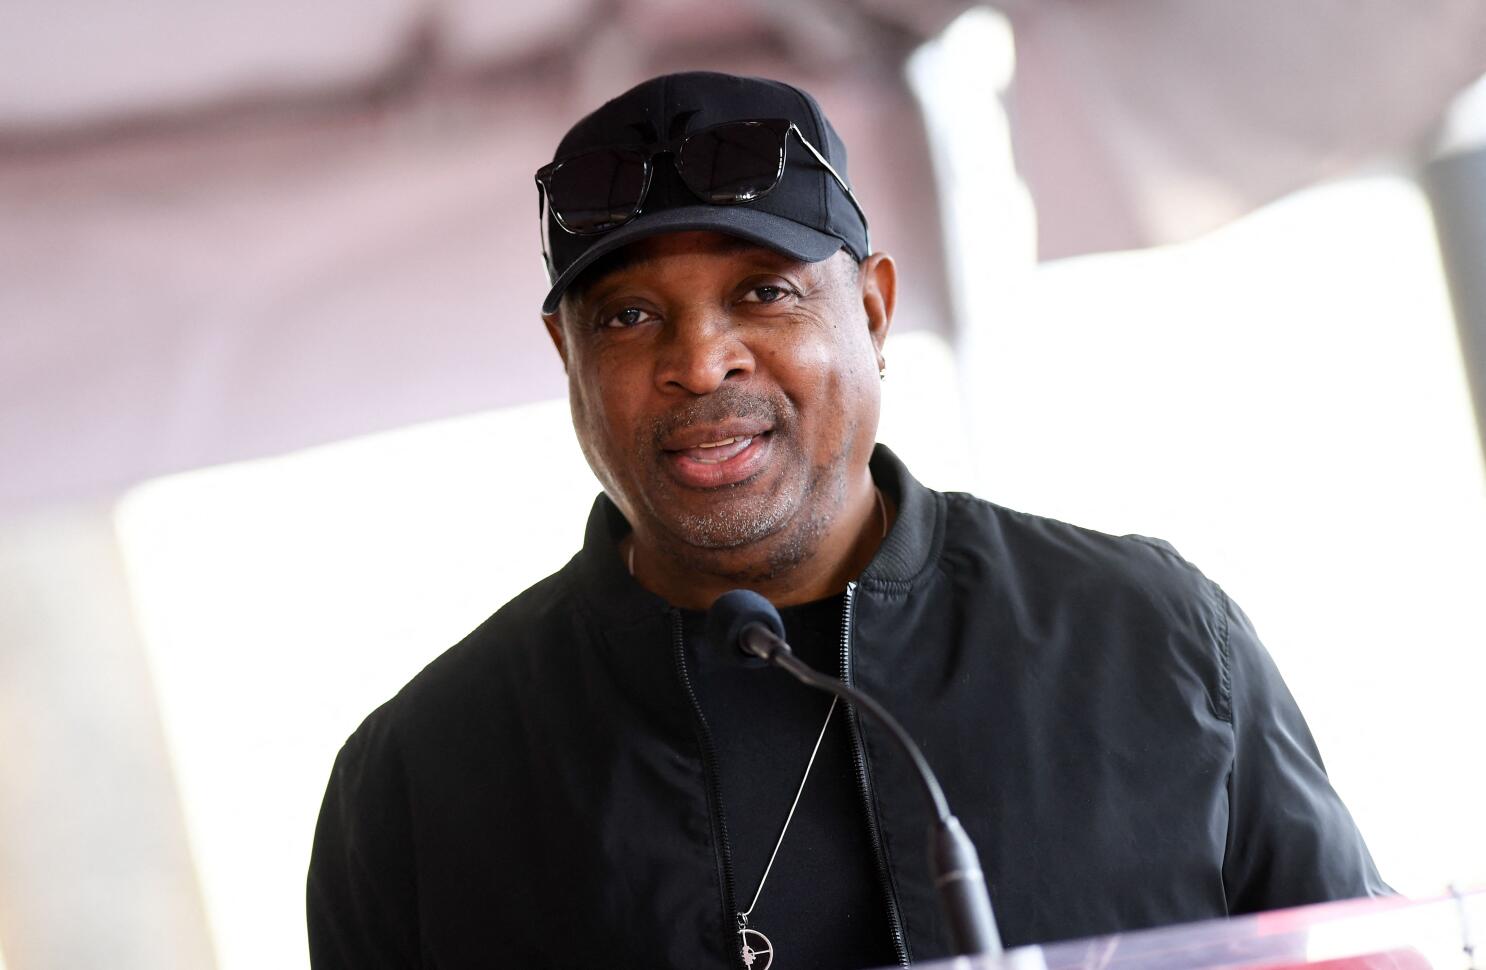 Rock & Roll Hall of Fame inductee Chuck D, who is rolling out new